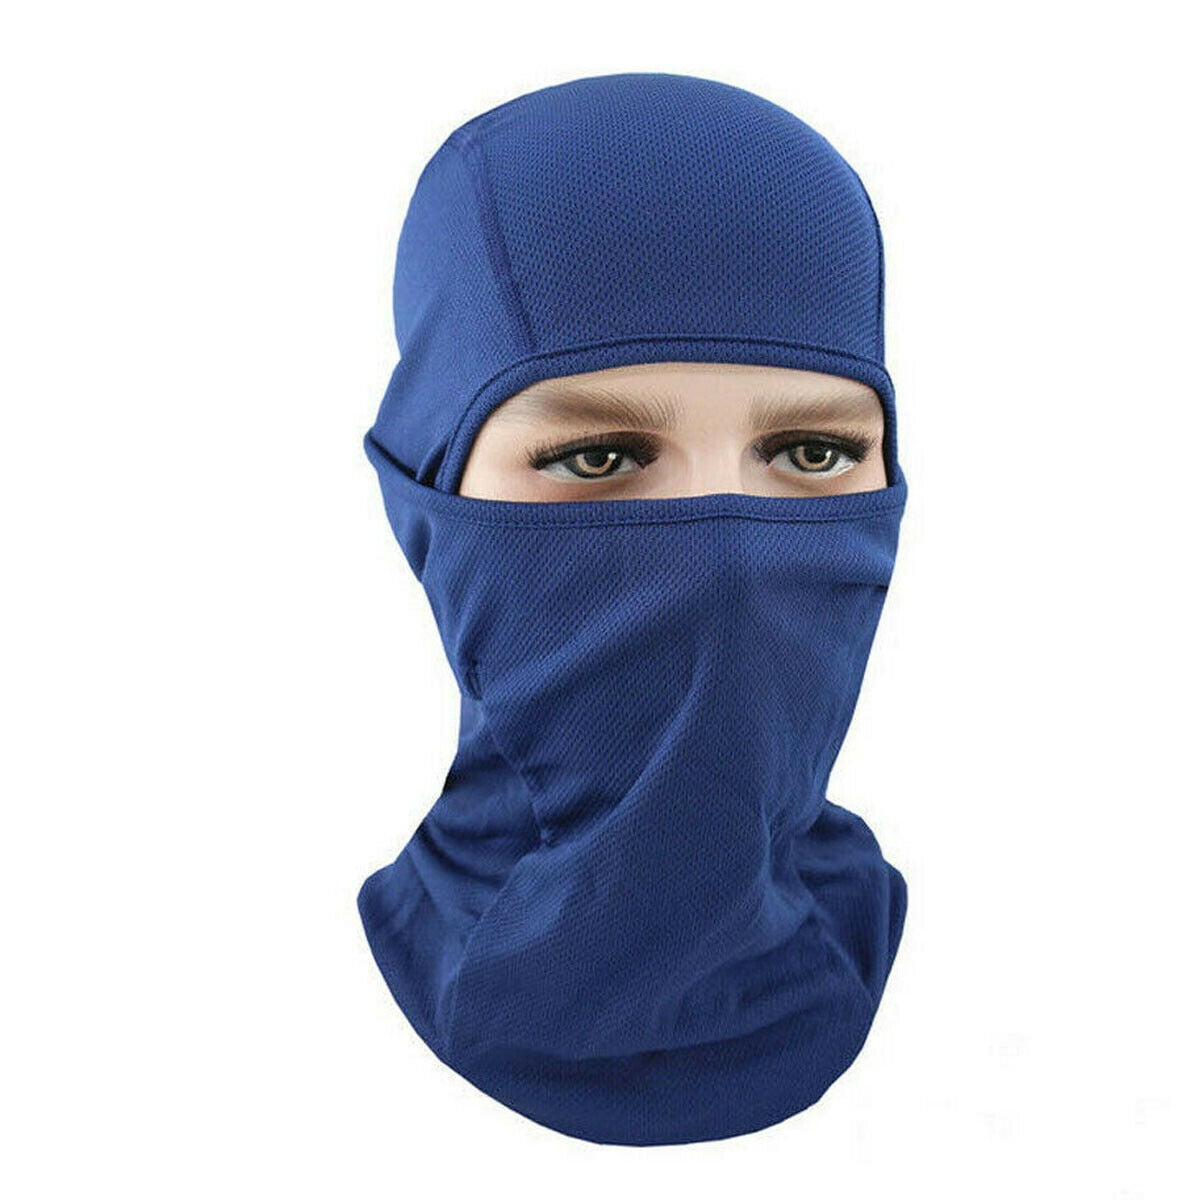 Details about   Full Face Mask Cover Balaclava Motorcycle Cycling Outdoor Sport Full Face Mask 